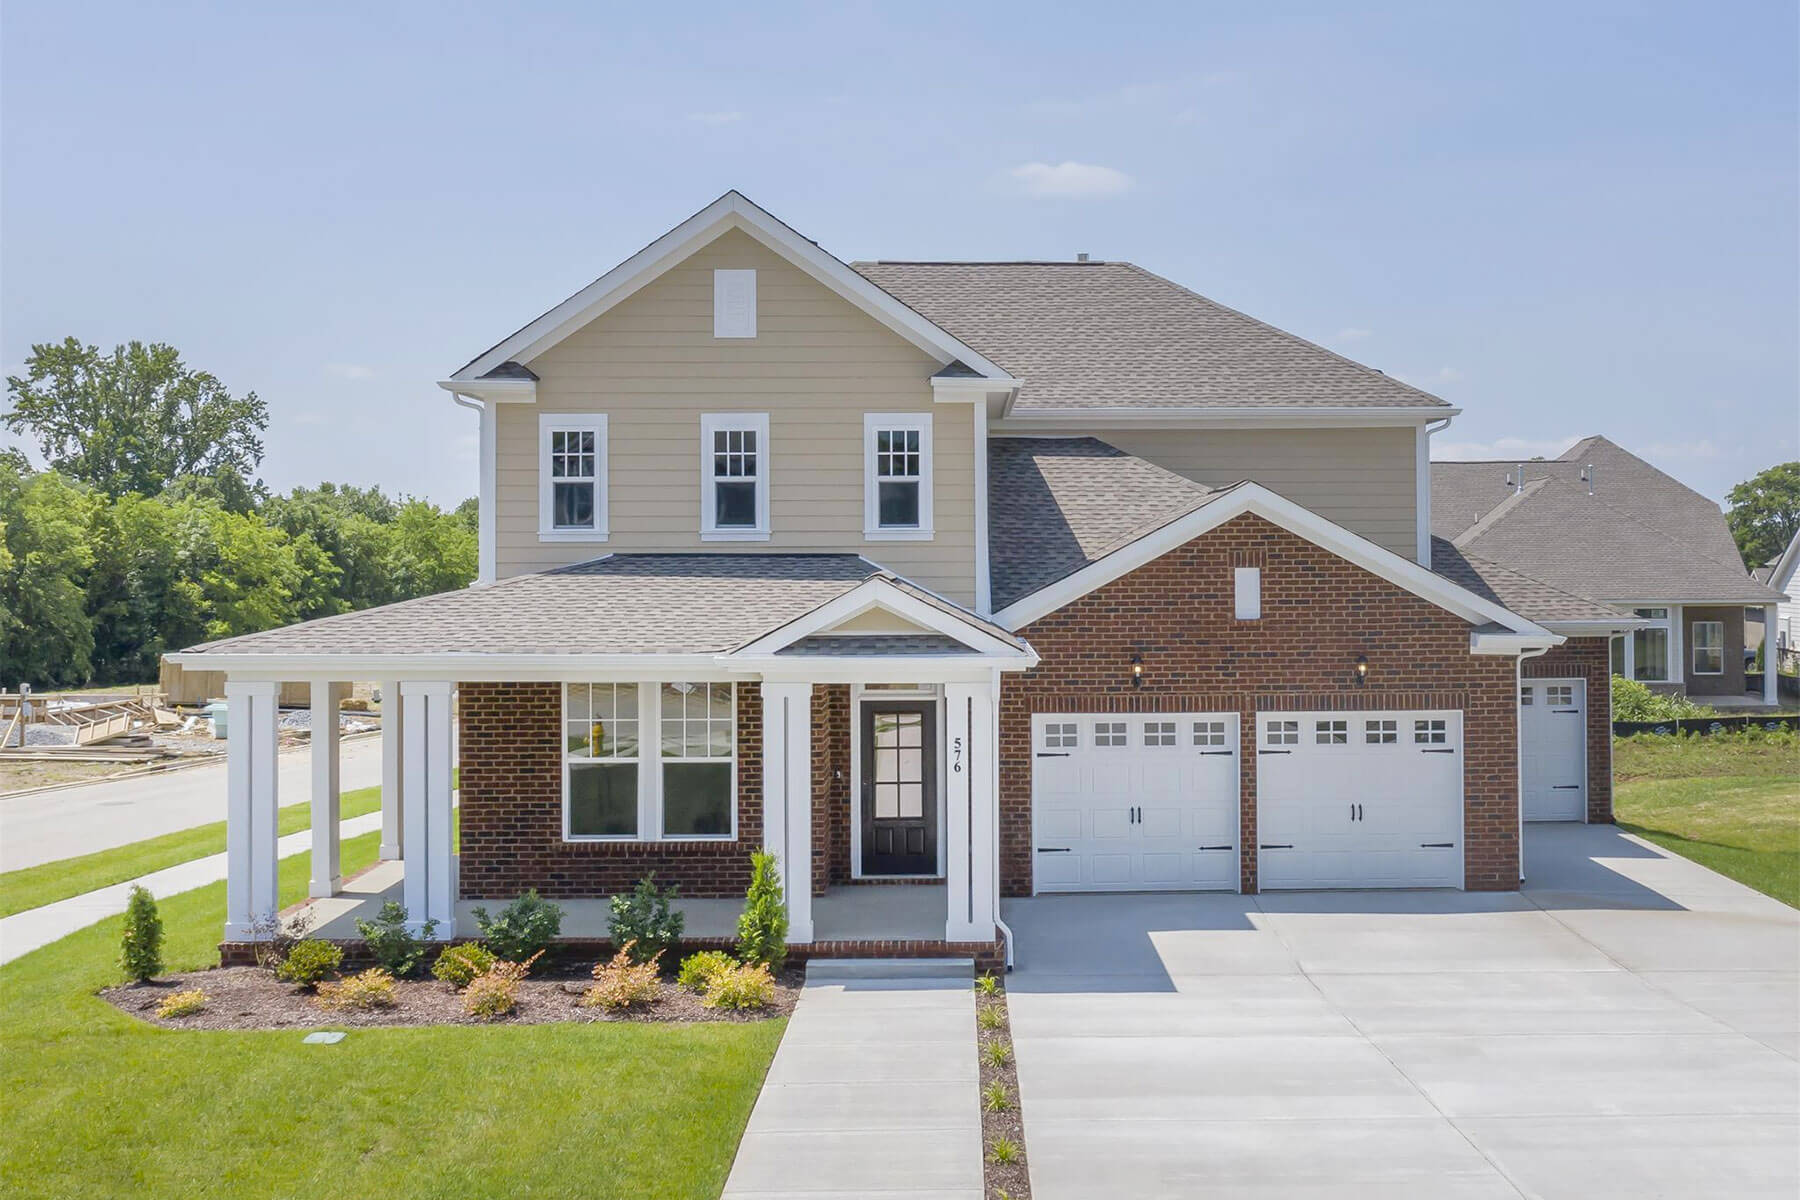 60' Lots by Lennar - Durham Farms New Homes for Sale in Hendersonville, TN